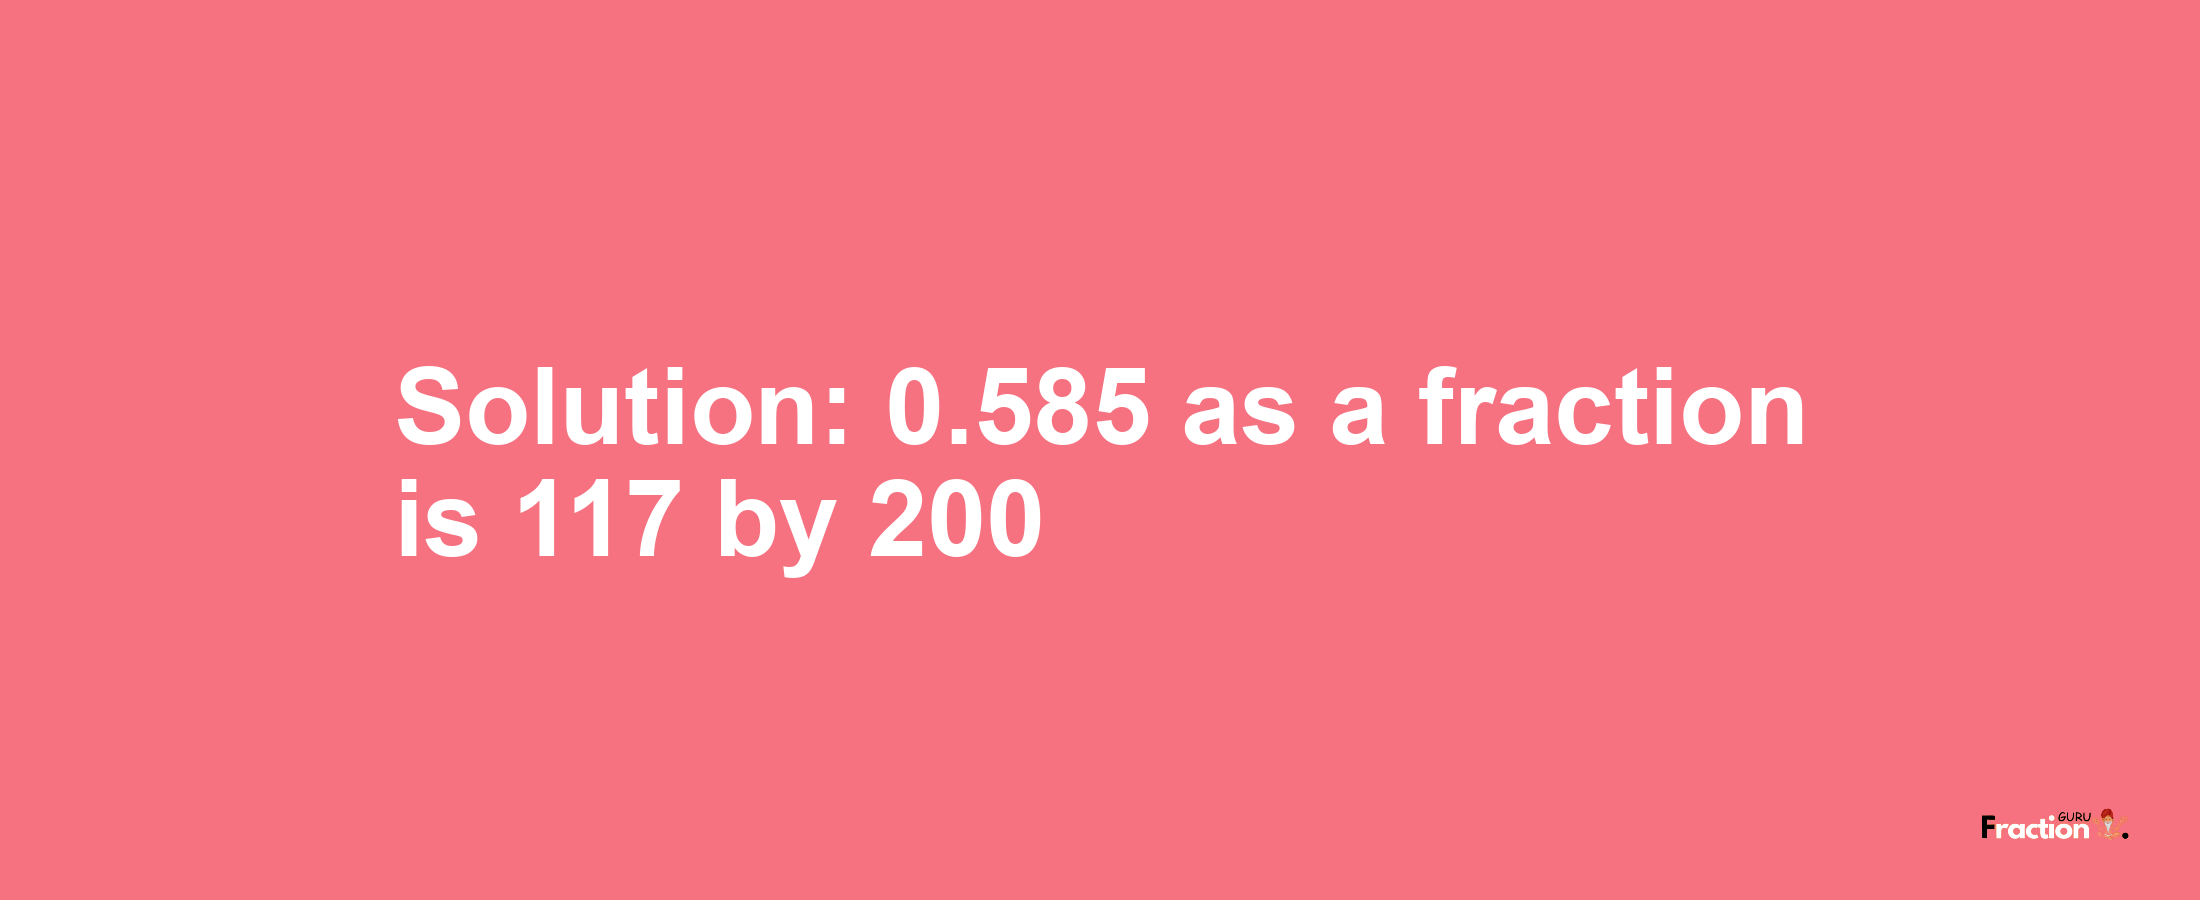 Solution:0.585 as a fraction is 117/200